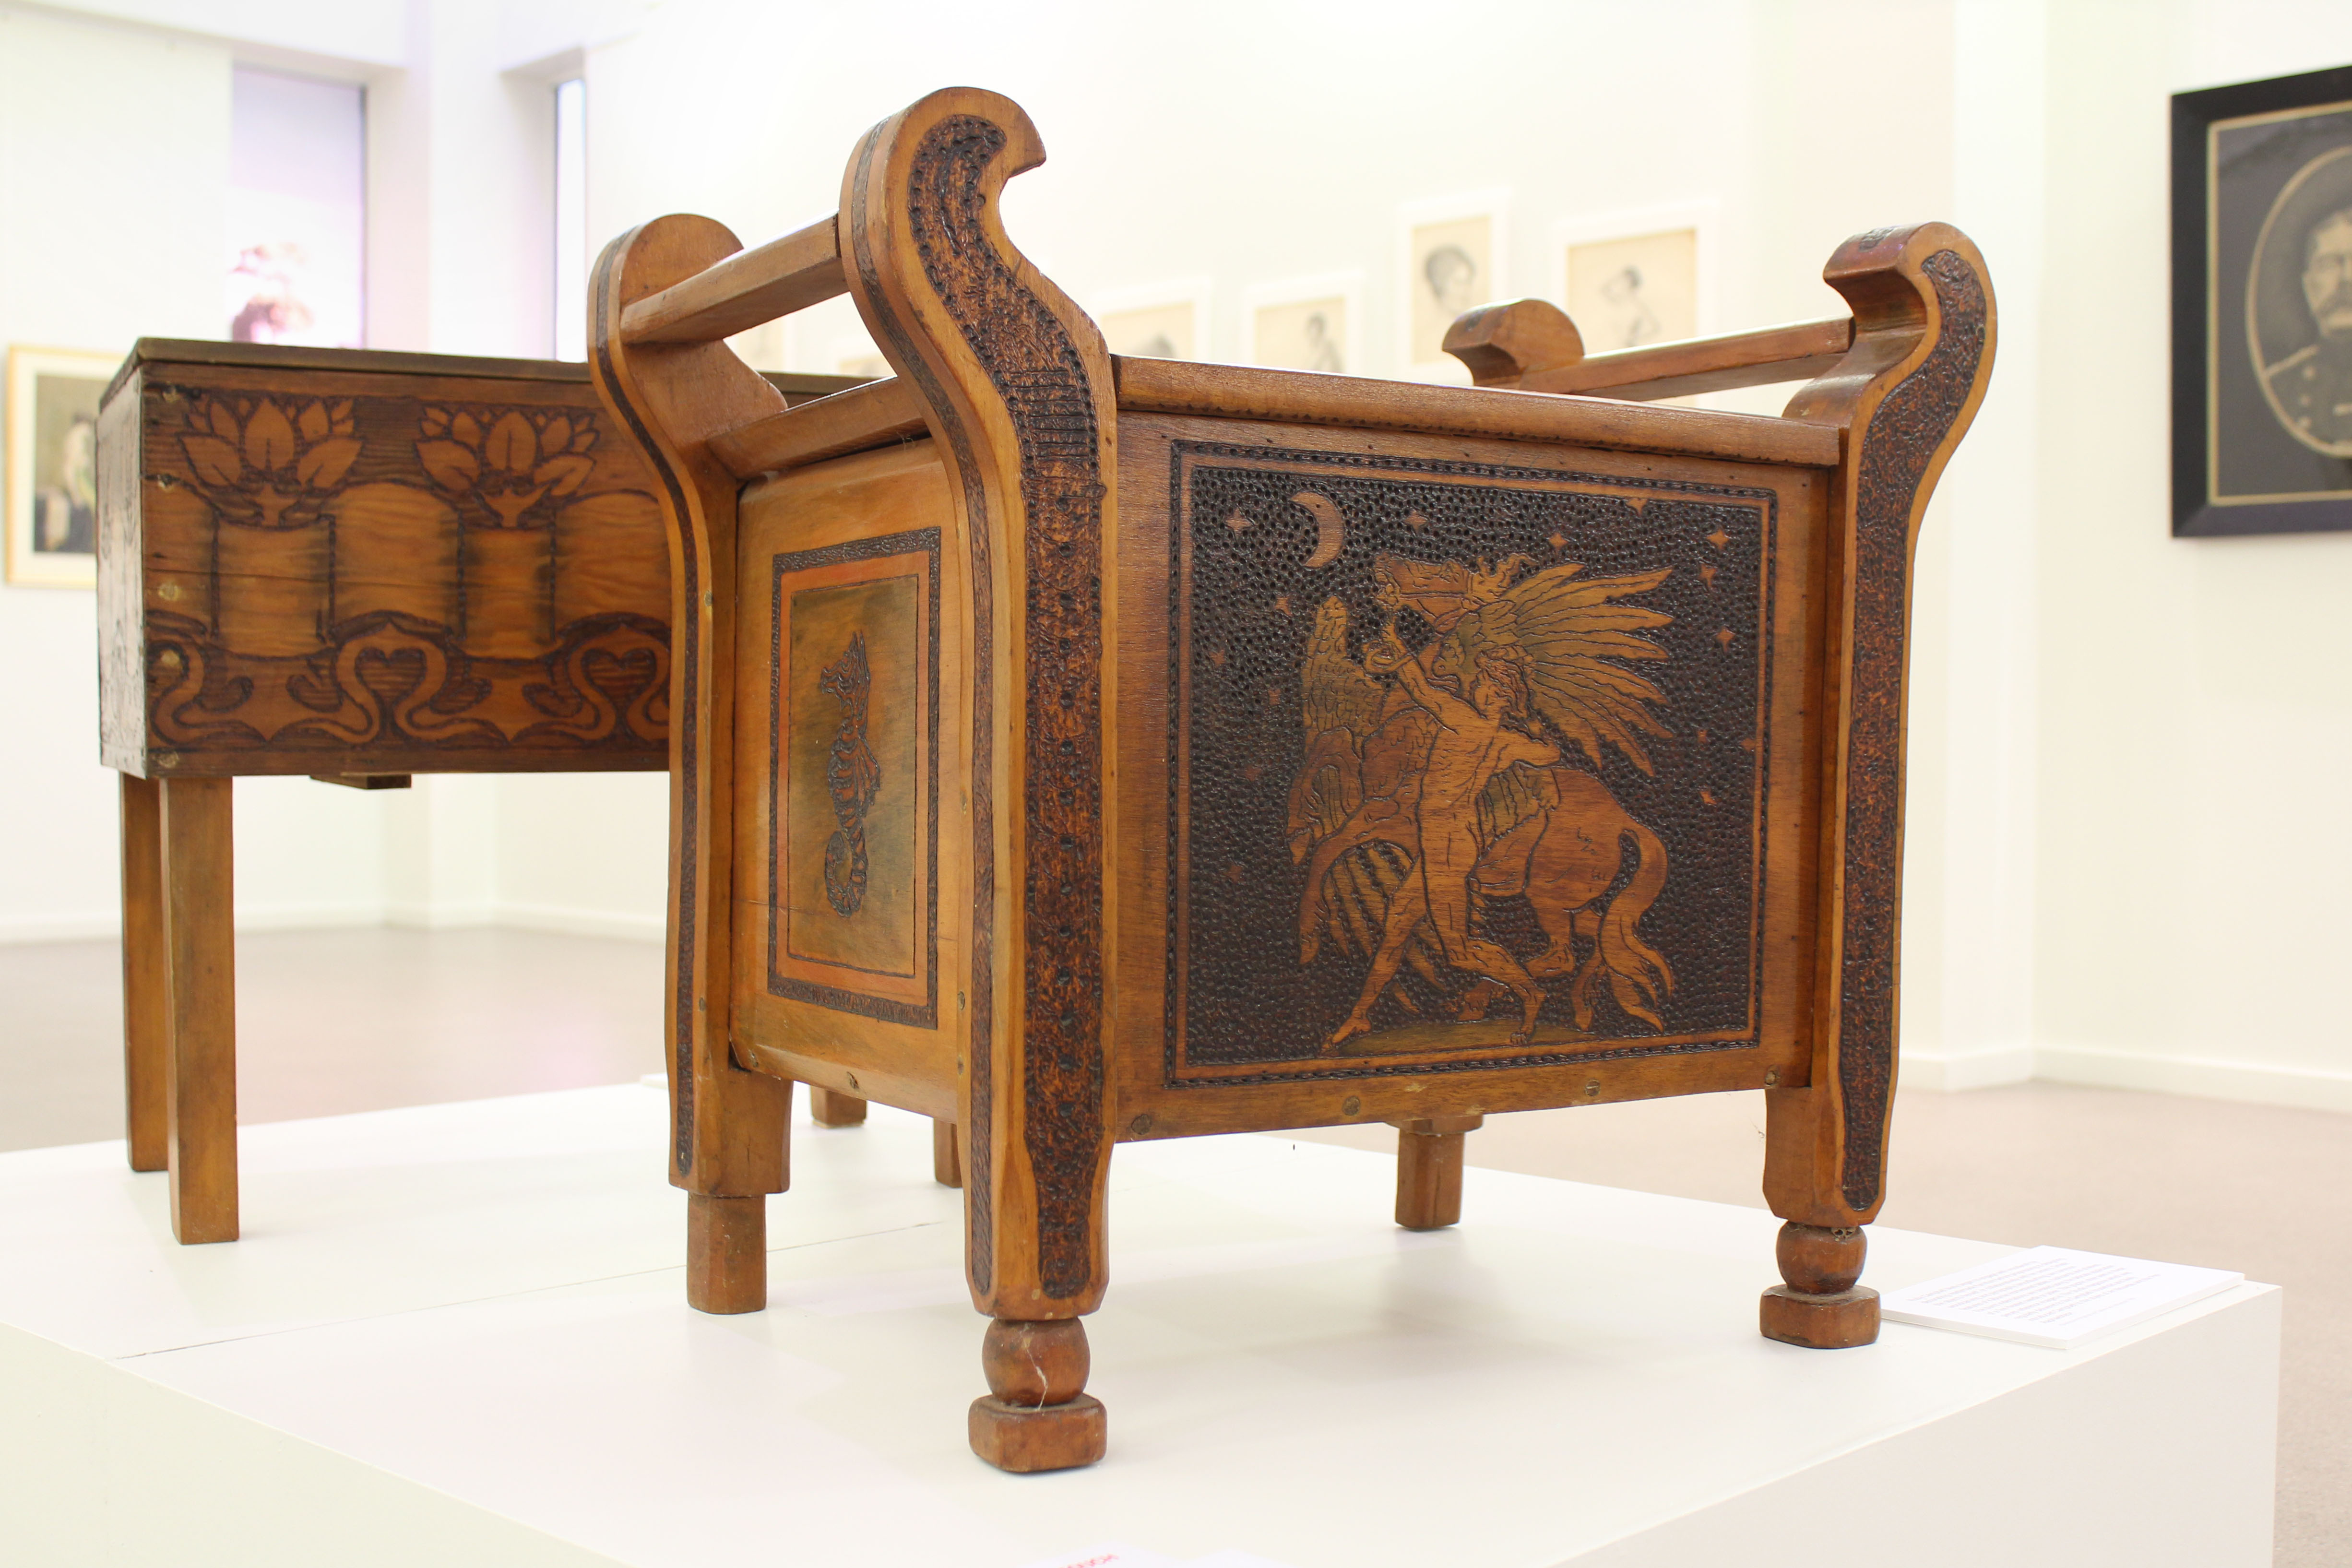 Pyrography and woodcarving on furniture